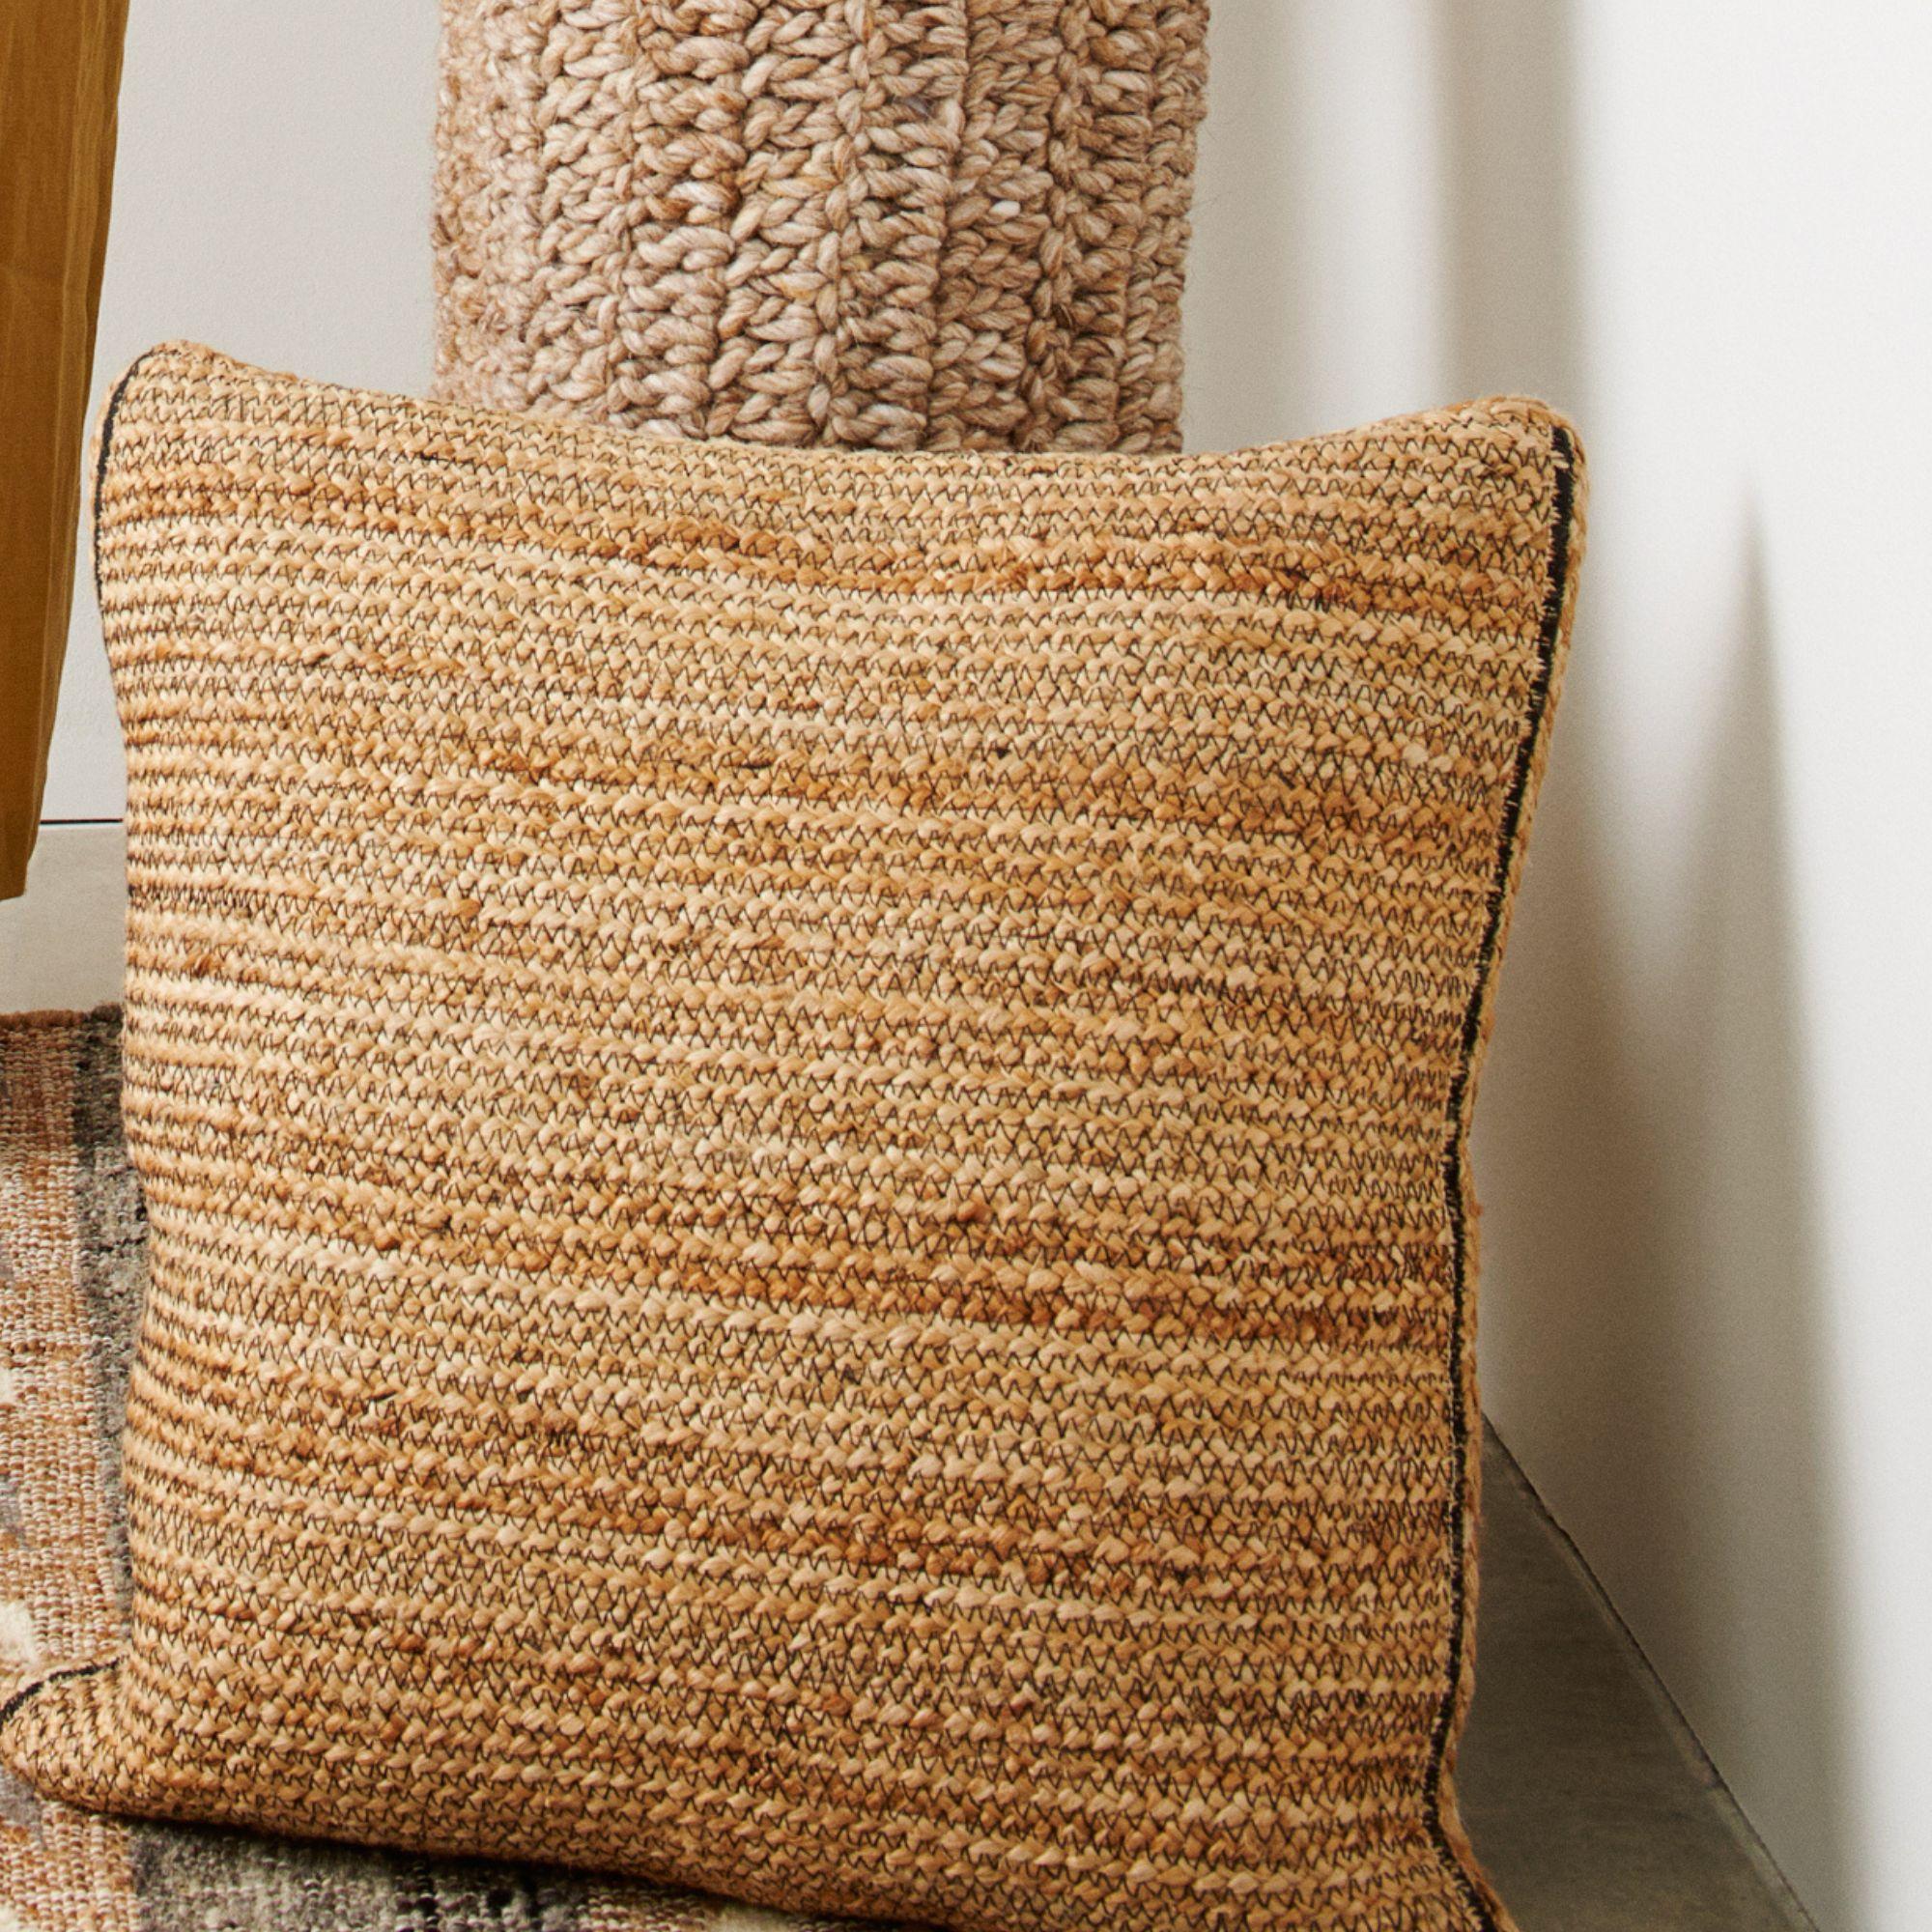 Tossa Pillow is a slightly textured and weighted braided pillow. Natural fiber jute has been used to  breathe life in this neutral style of pillow.  The beauty of this pillow is in its pure design that stands out with the use of undyed yarns left in